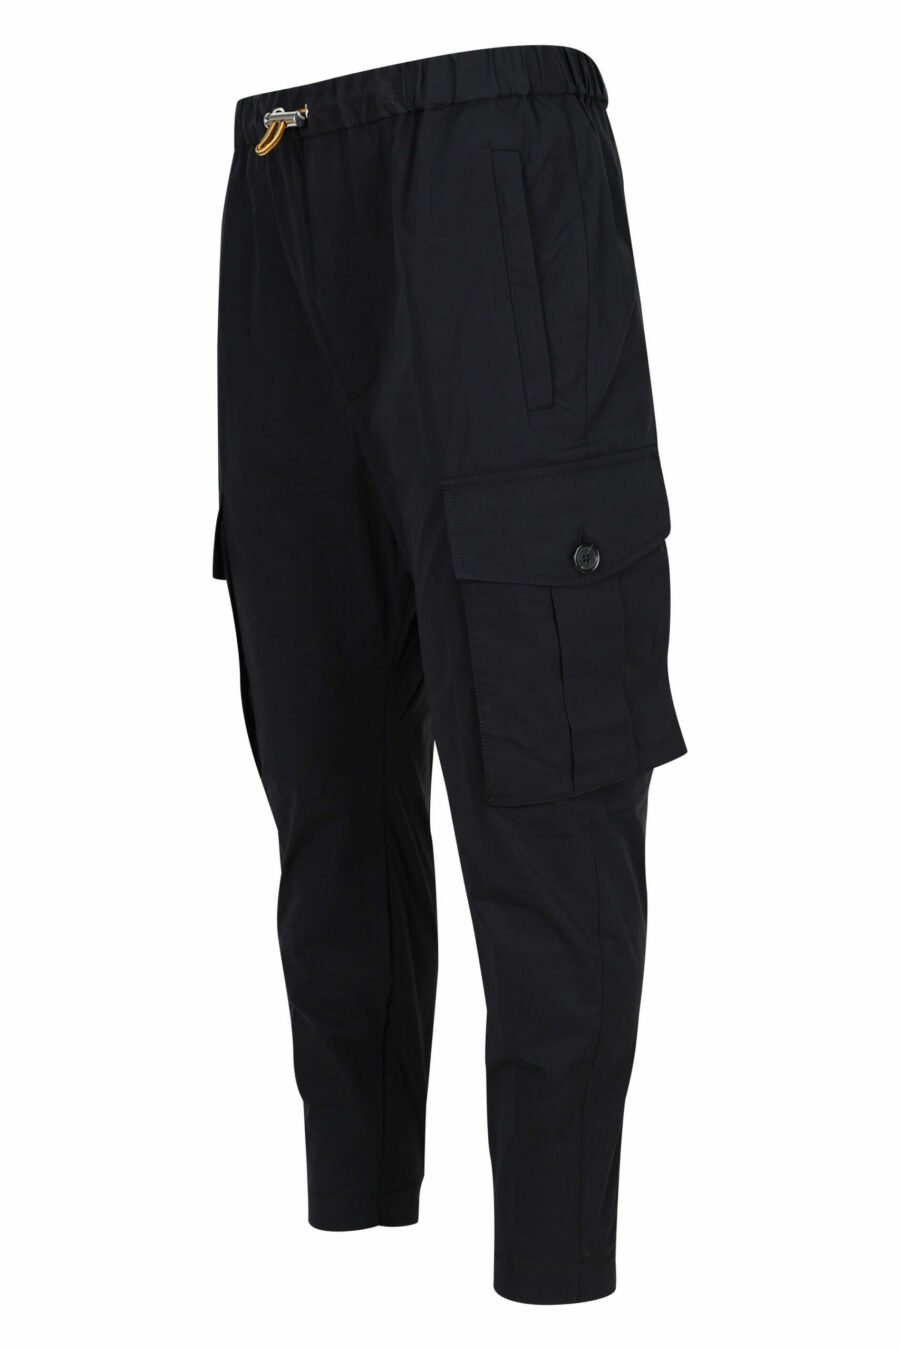 Black pully trousers - 8054148060992 1 scaled